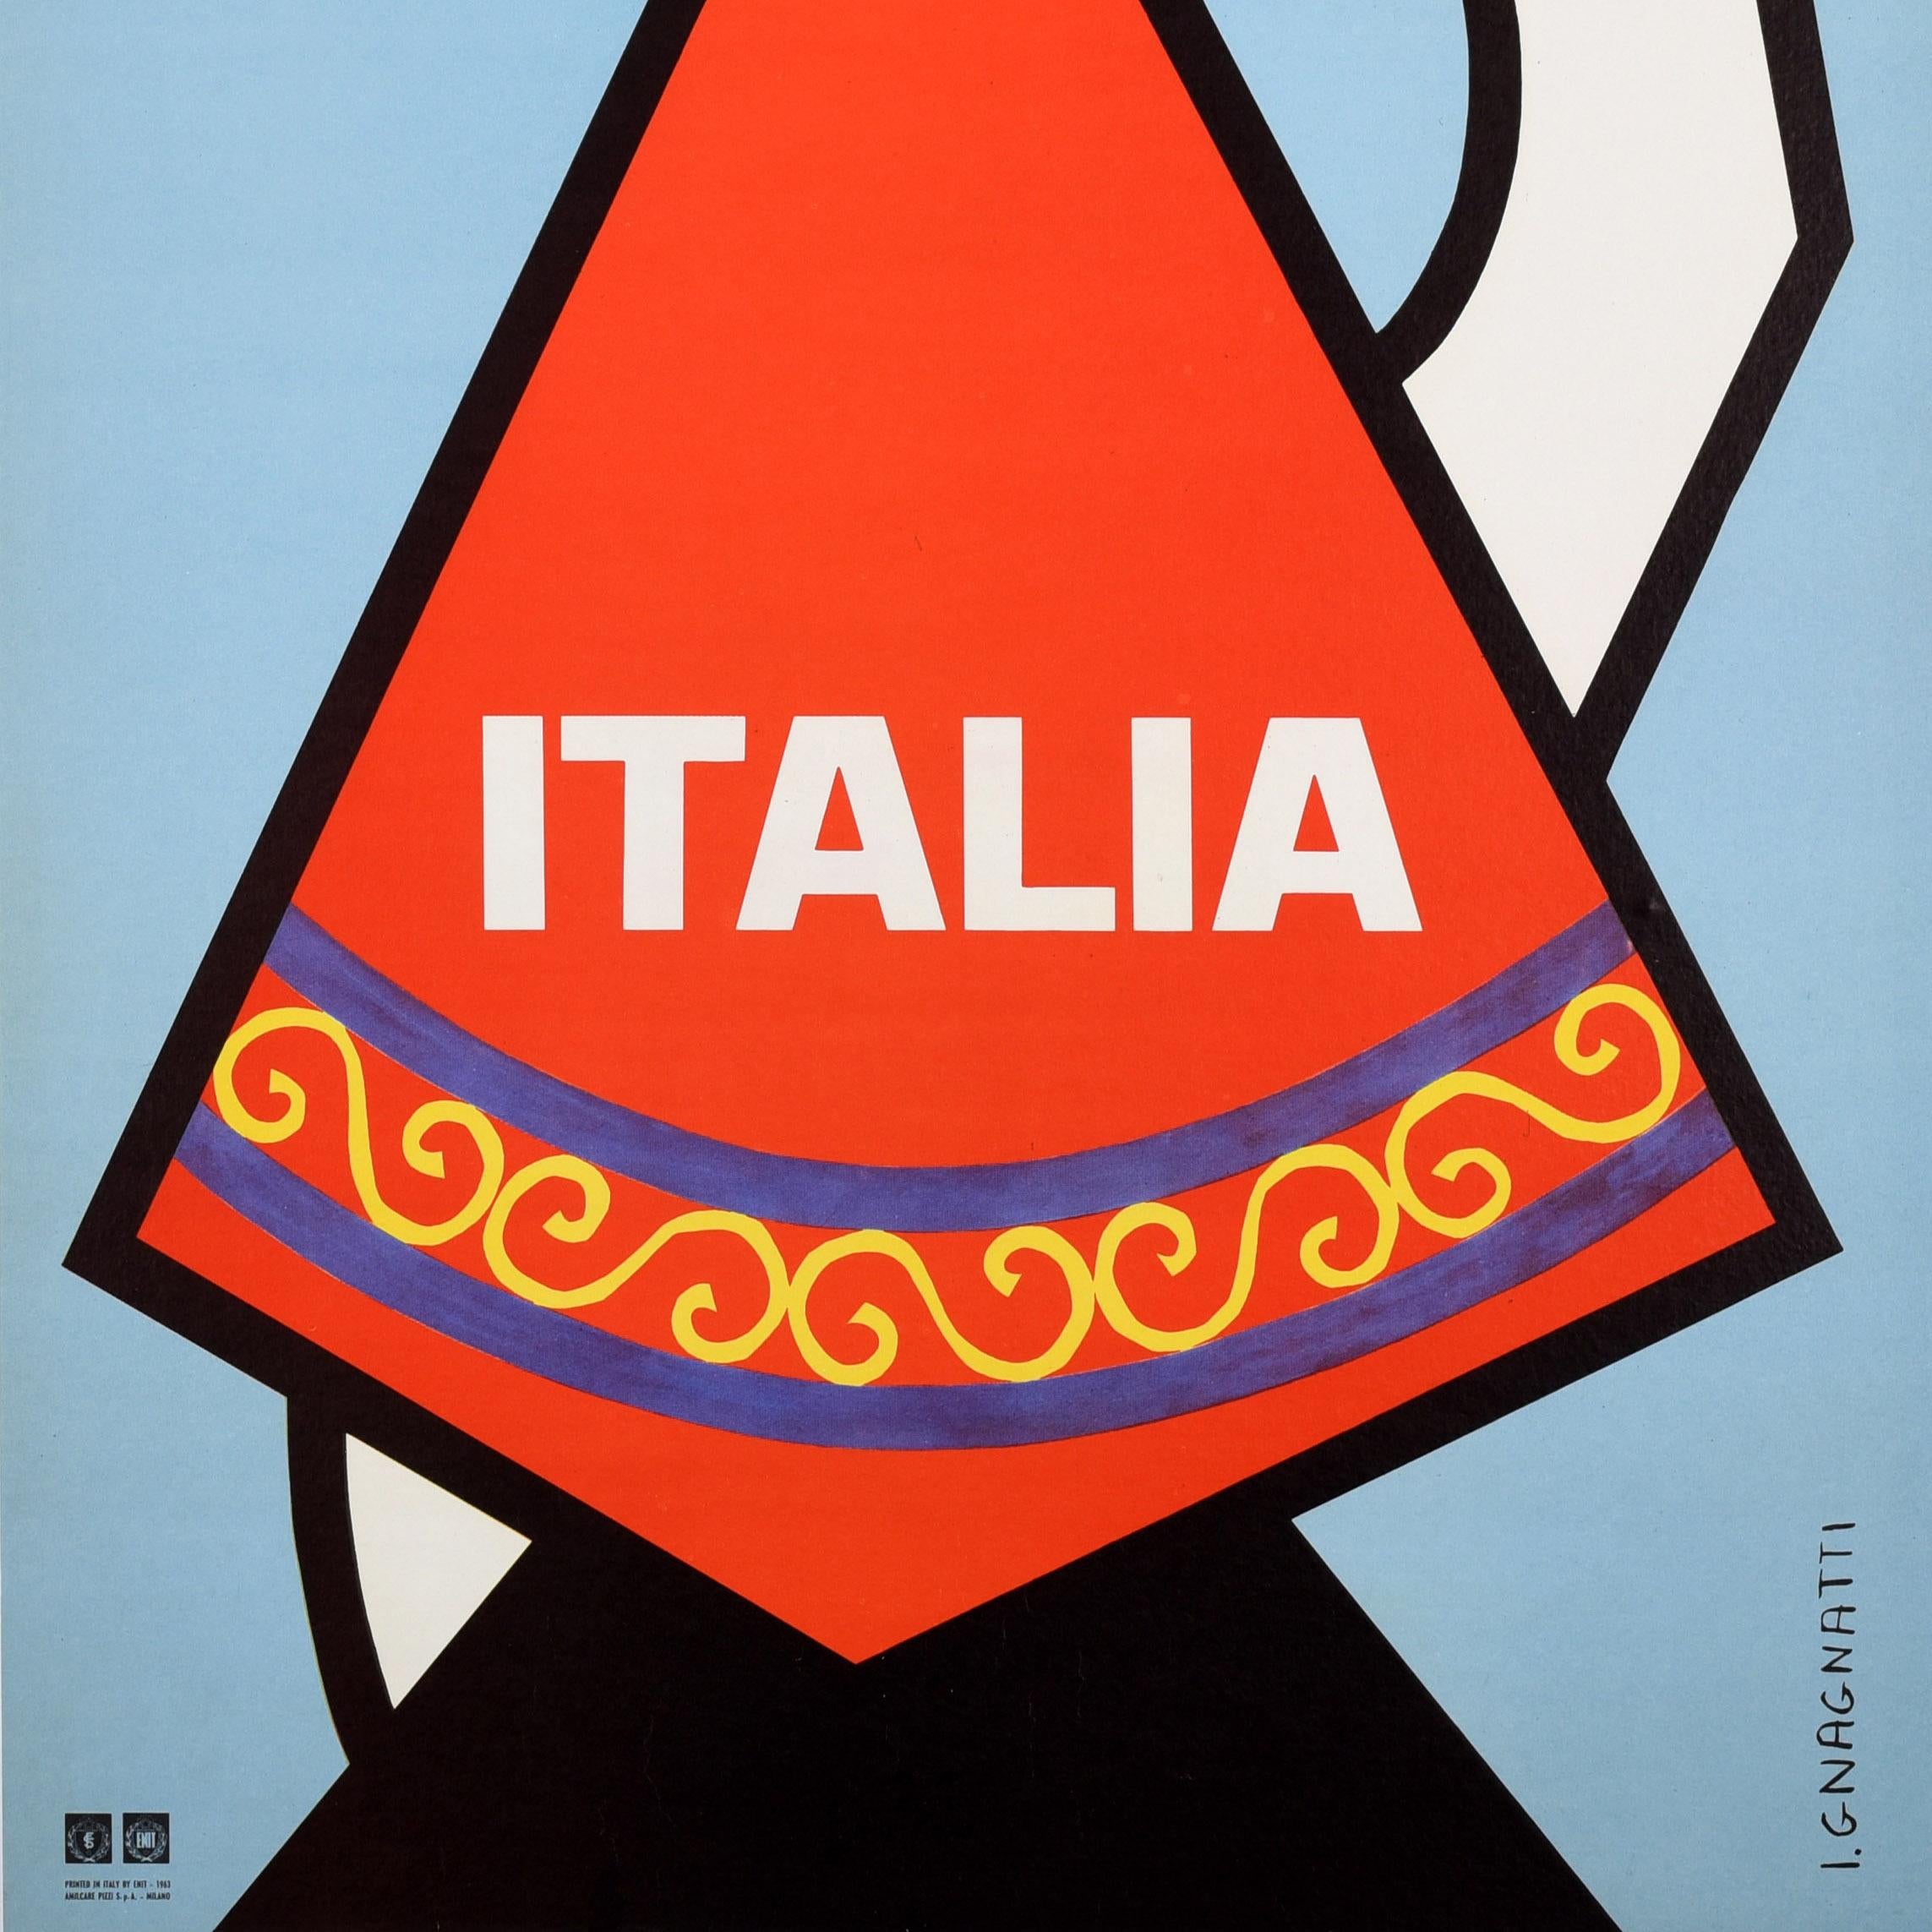 Original Vintage Travel Poster Italia Italy Fruit Midcentury Modern ENIT Design In Good Condition For Sale In London, GB